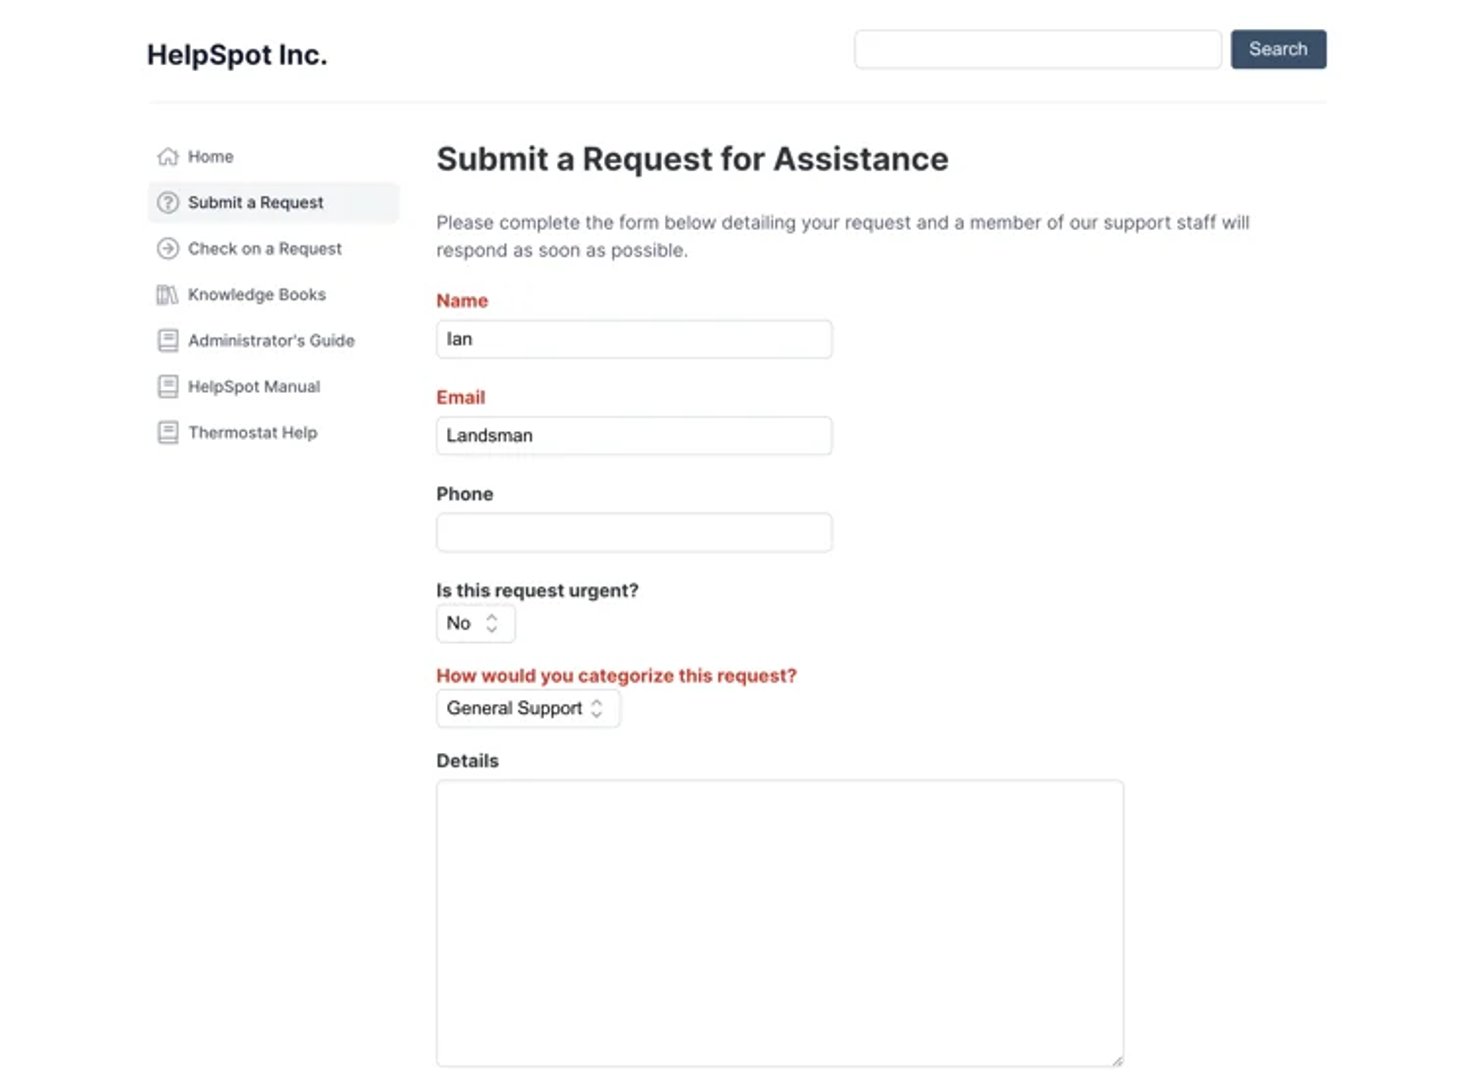 Submit a Request for Assistance with HelpSpot